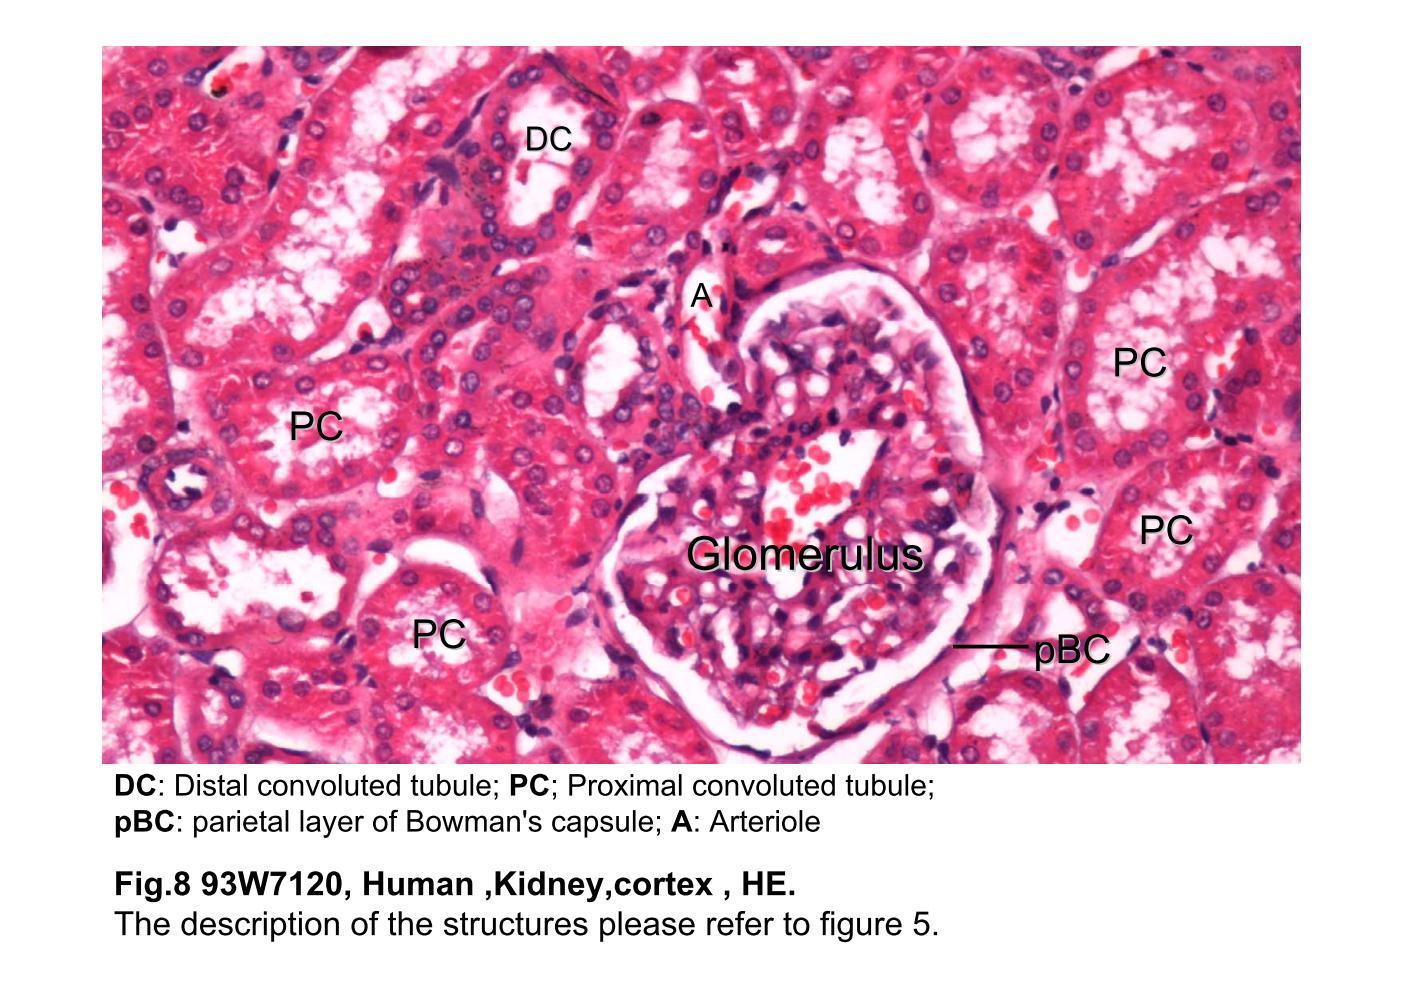 block8_16.jpg - Fig.8 93W7120, Human ,Kidney,cortex , HE.The description of the structures please refer to figure 5.